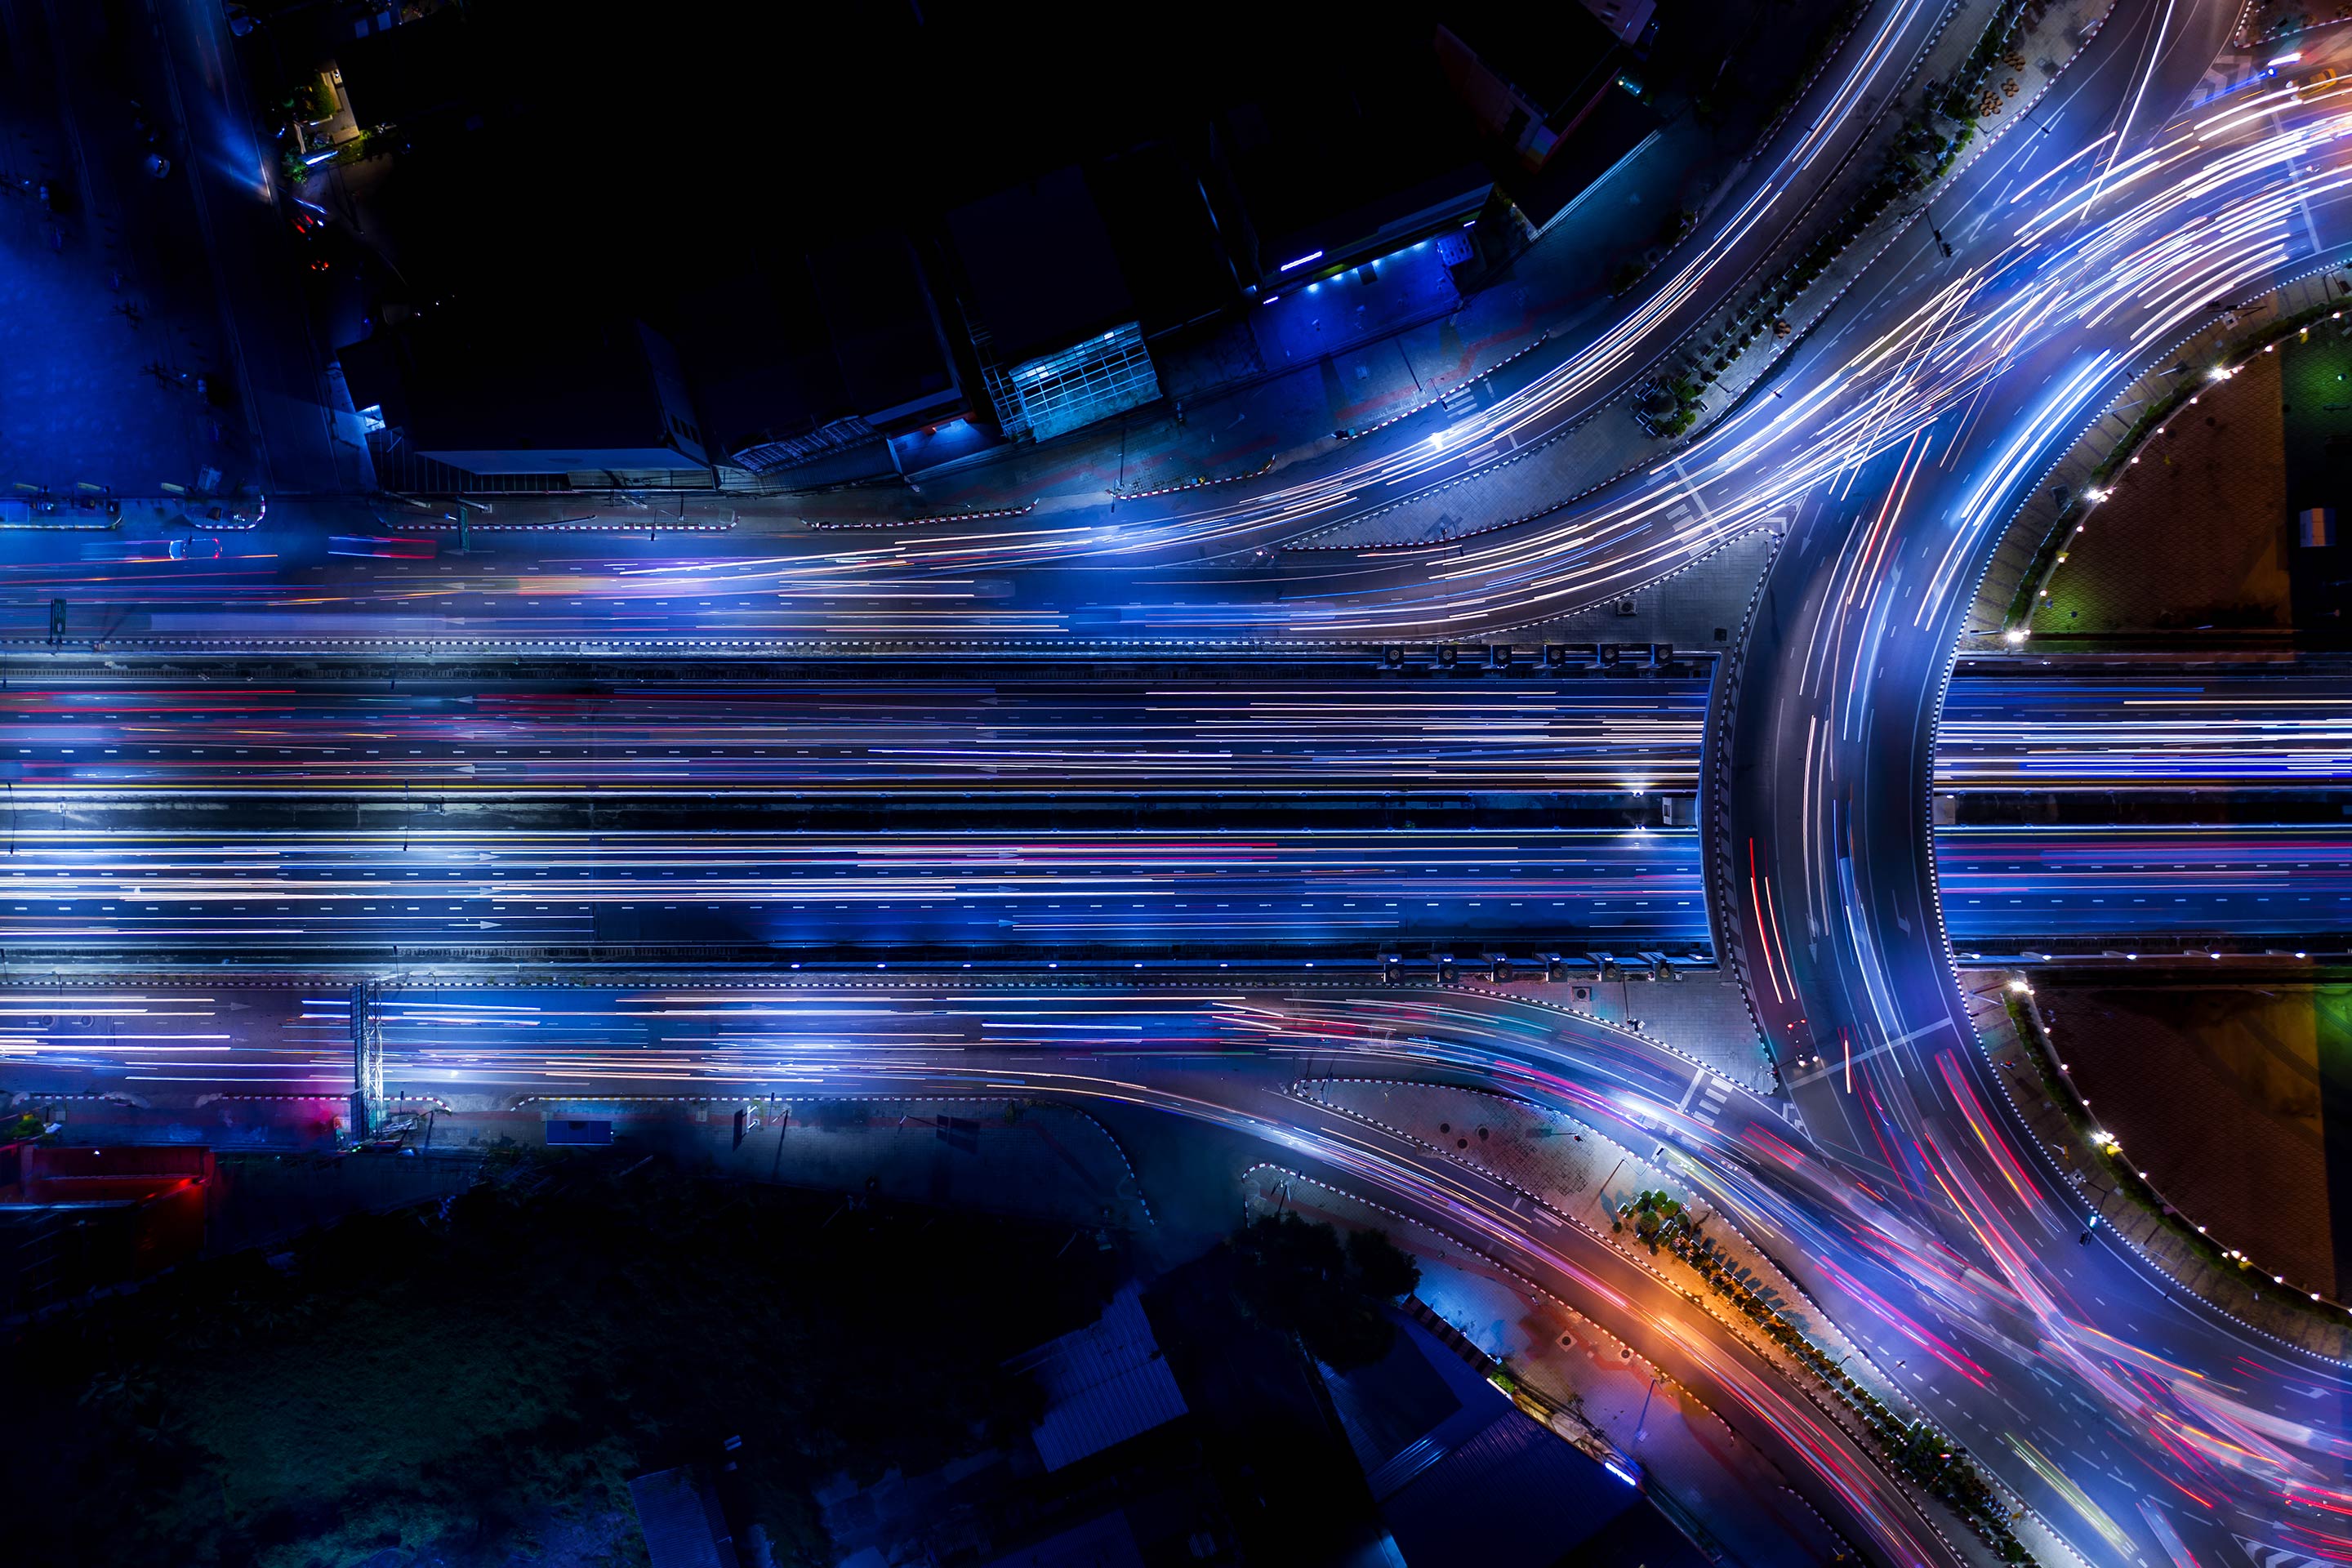 From above, cars speeding along interconnecting highways resemble the flow of data building an ecosystem